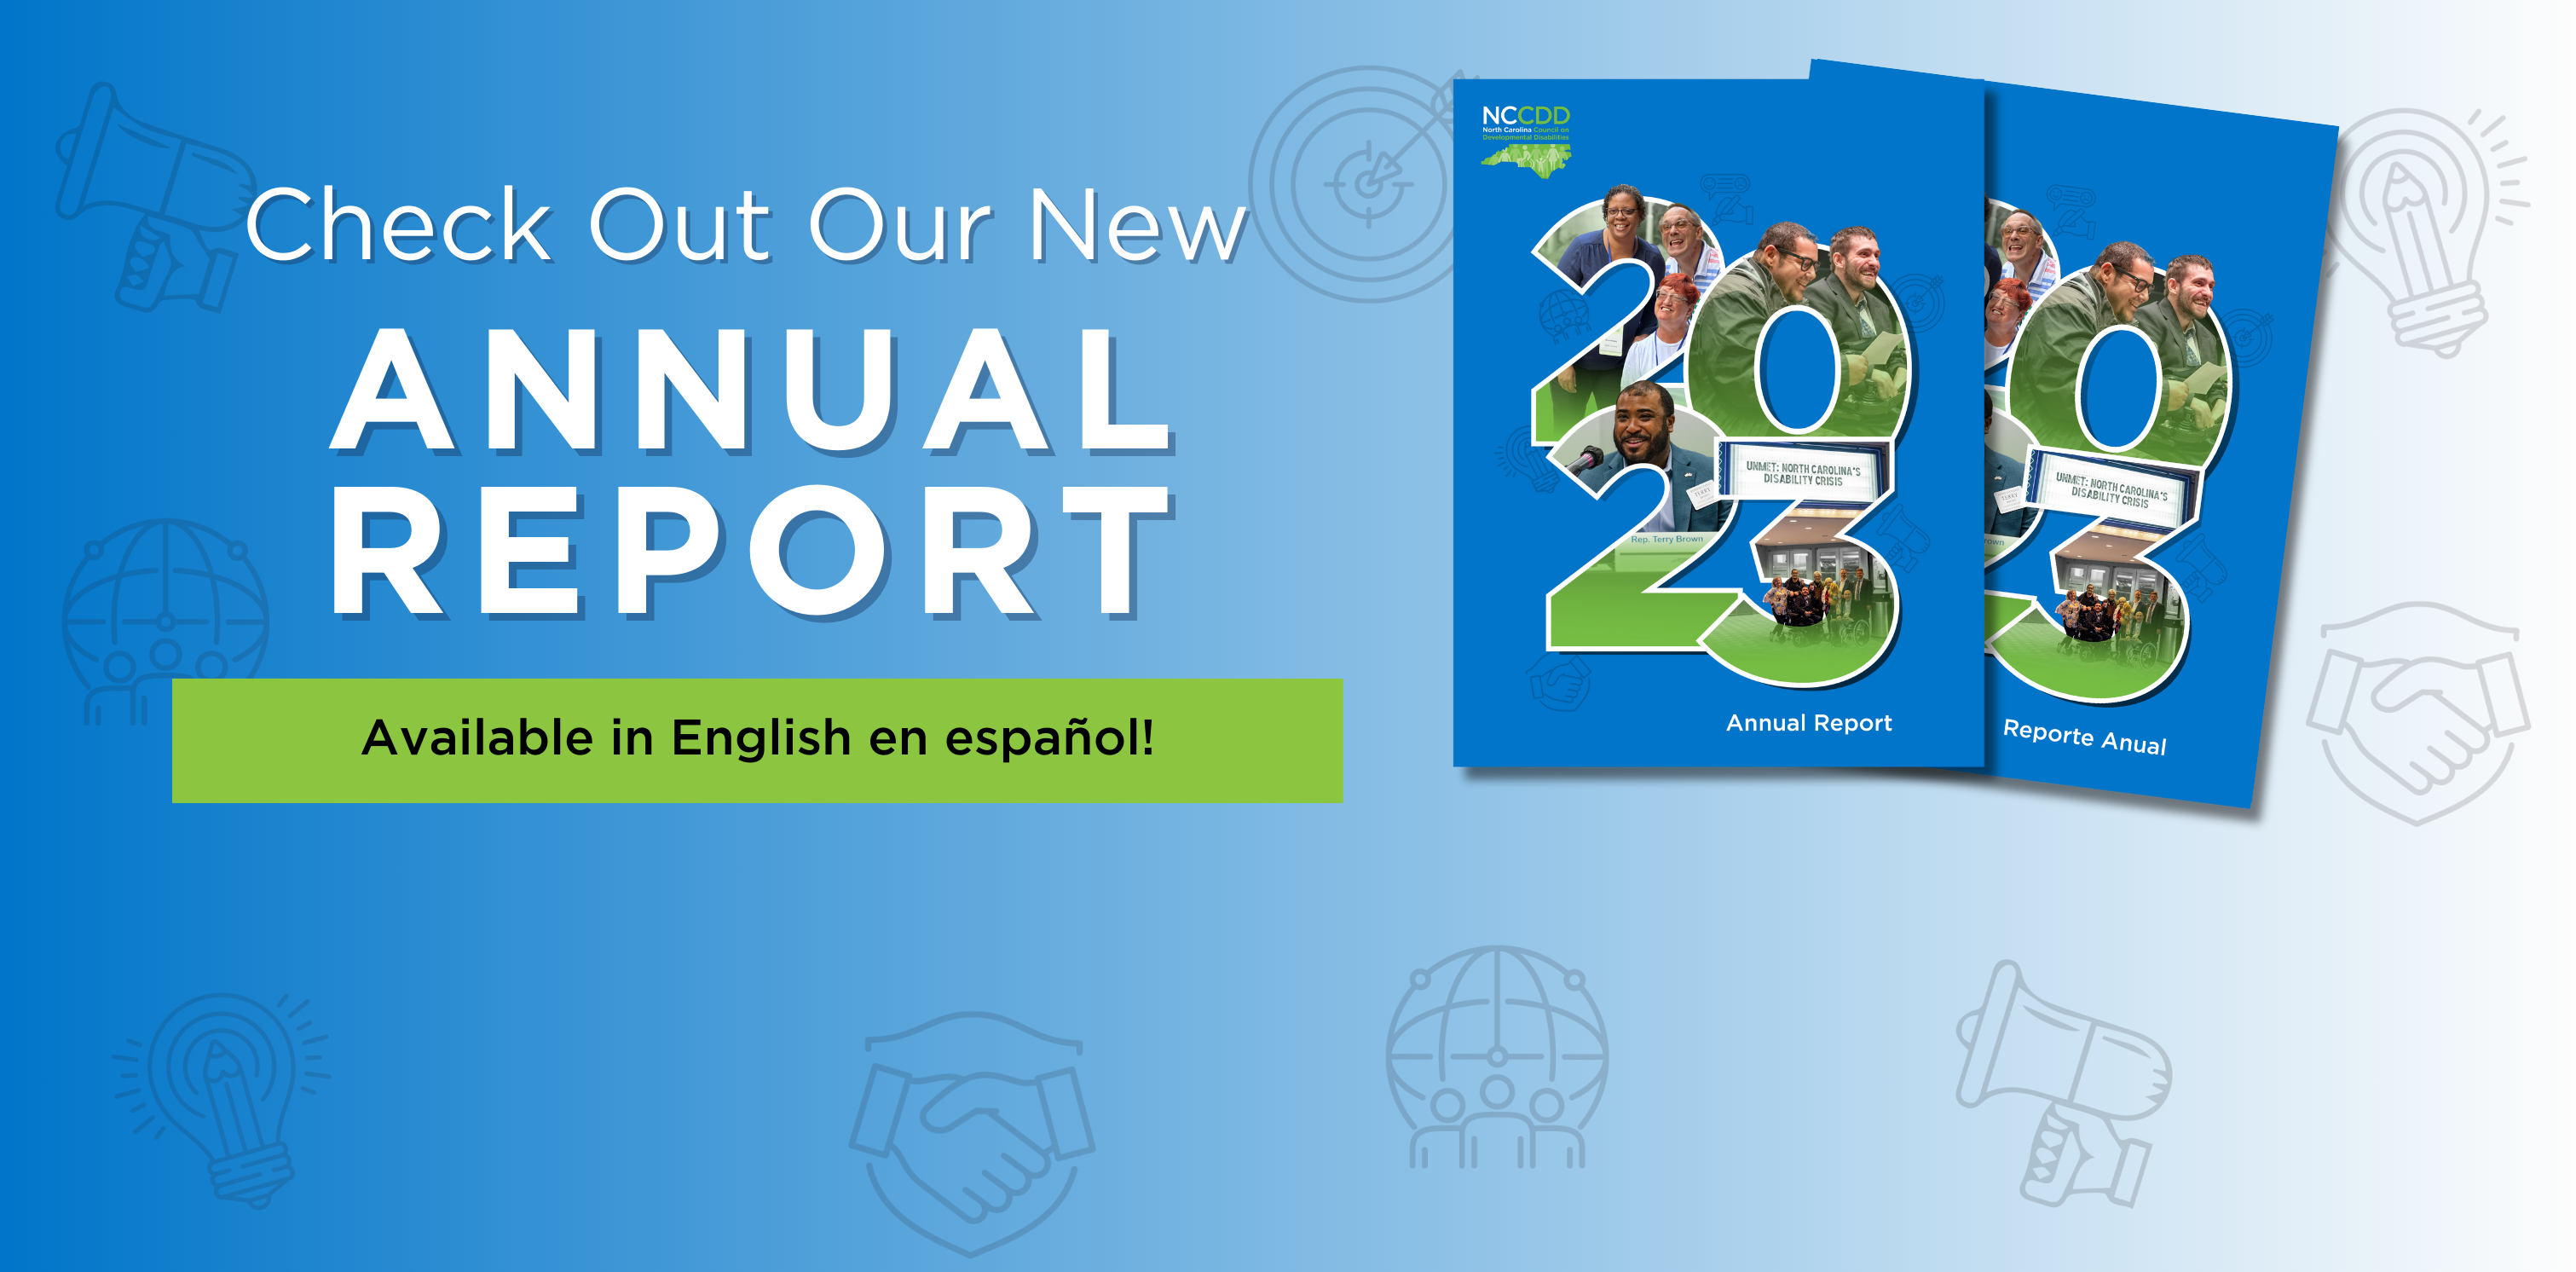 A homepage banner with the words “Check Out Our New 2023 Annual Report Available in English en espanol ” on the left side and two pictures of annual reports - one in English and one in Spanish